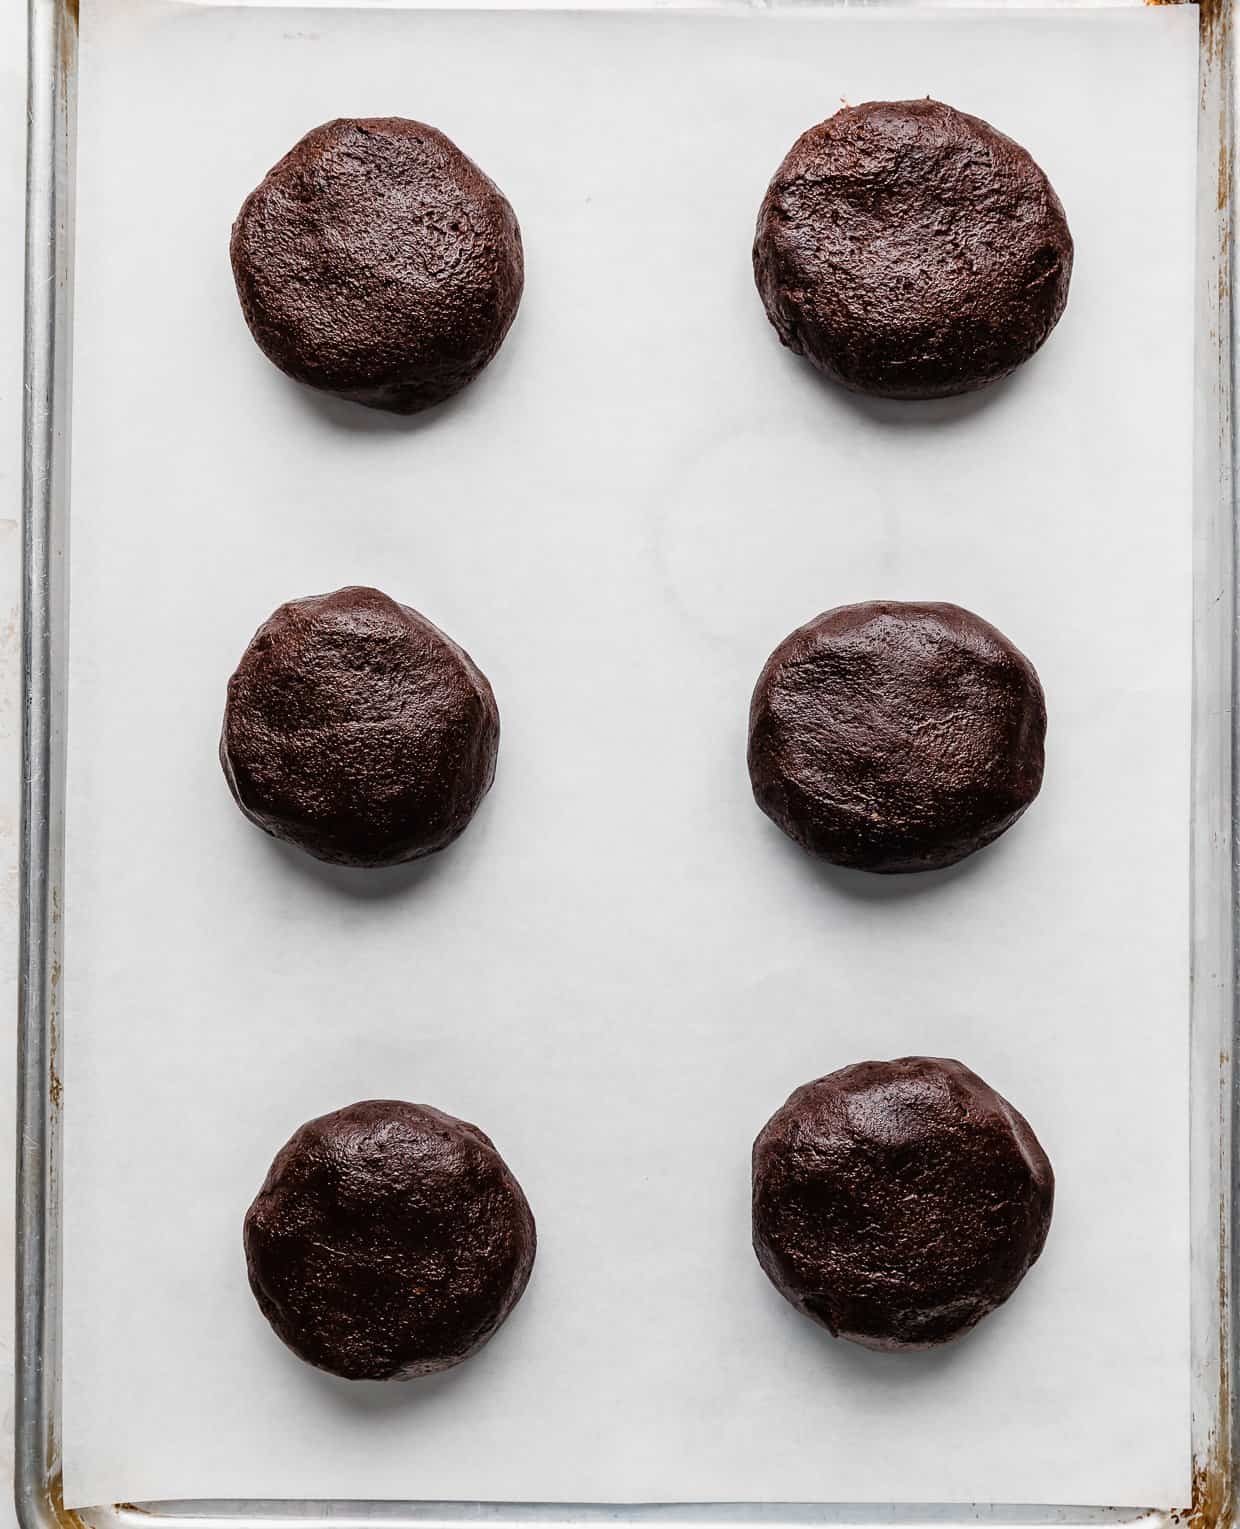 Six Peanut Butter Brownie Cookie dough balls on a white parchment lined baking sheet.